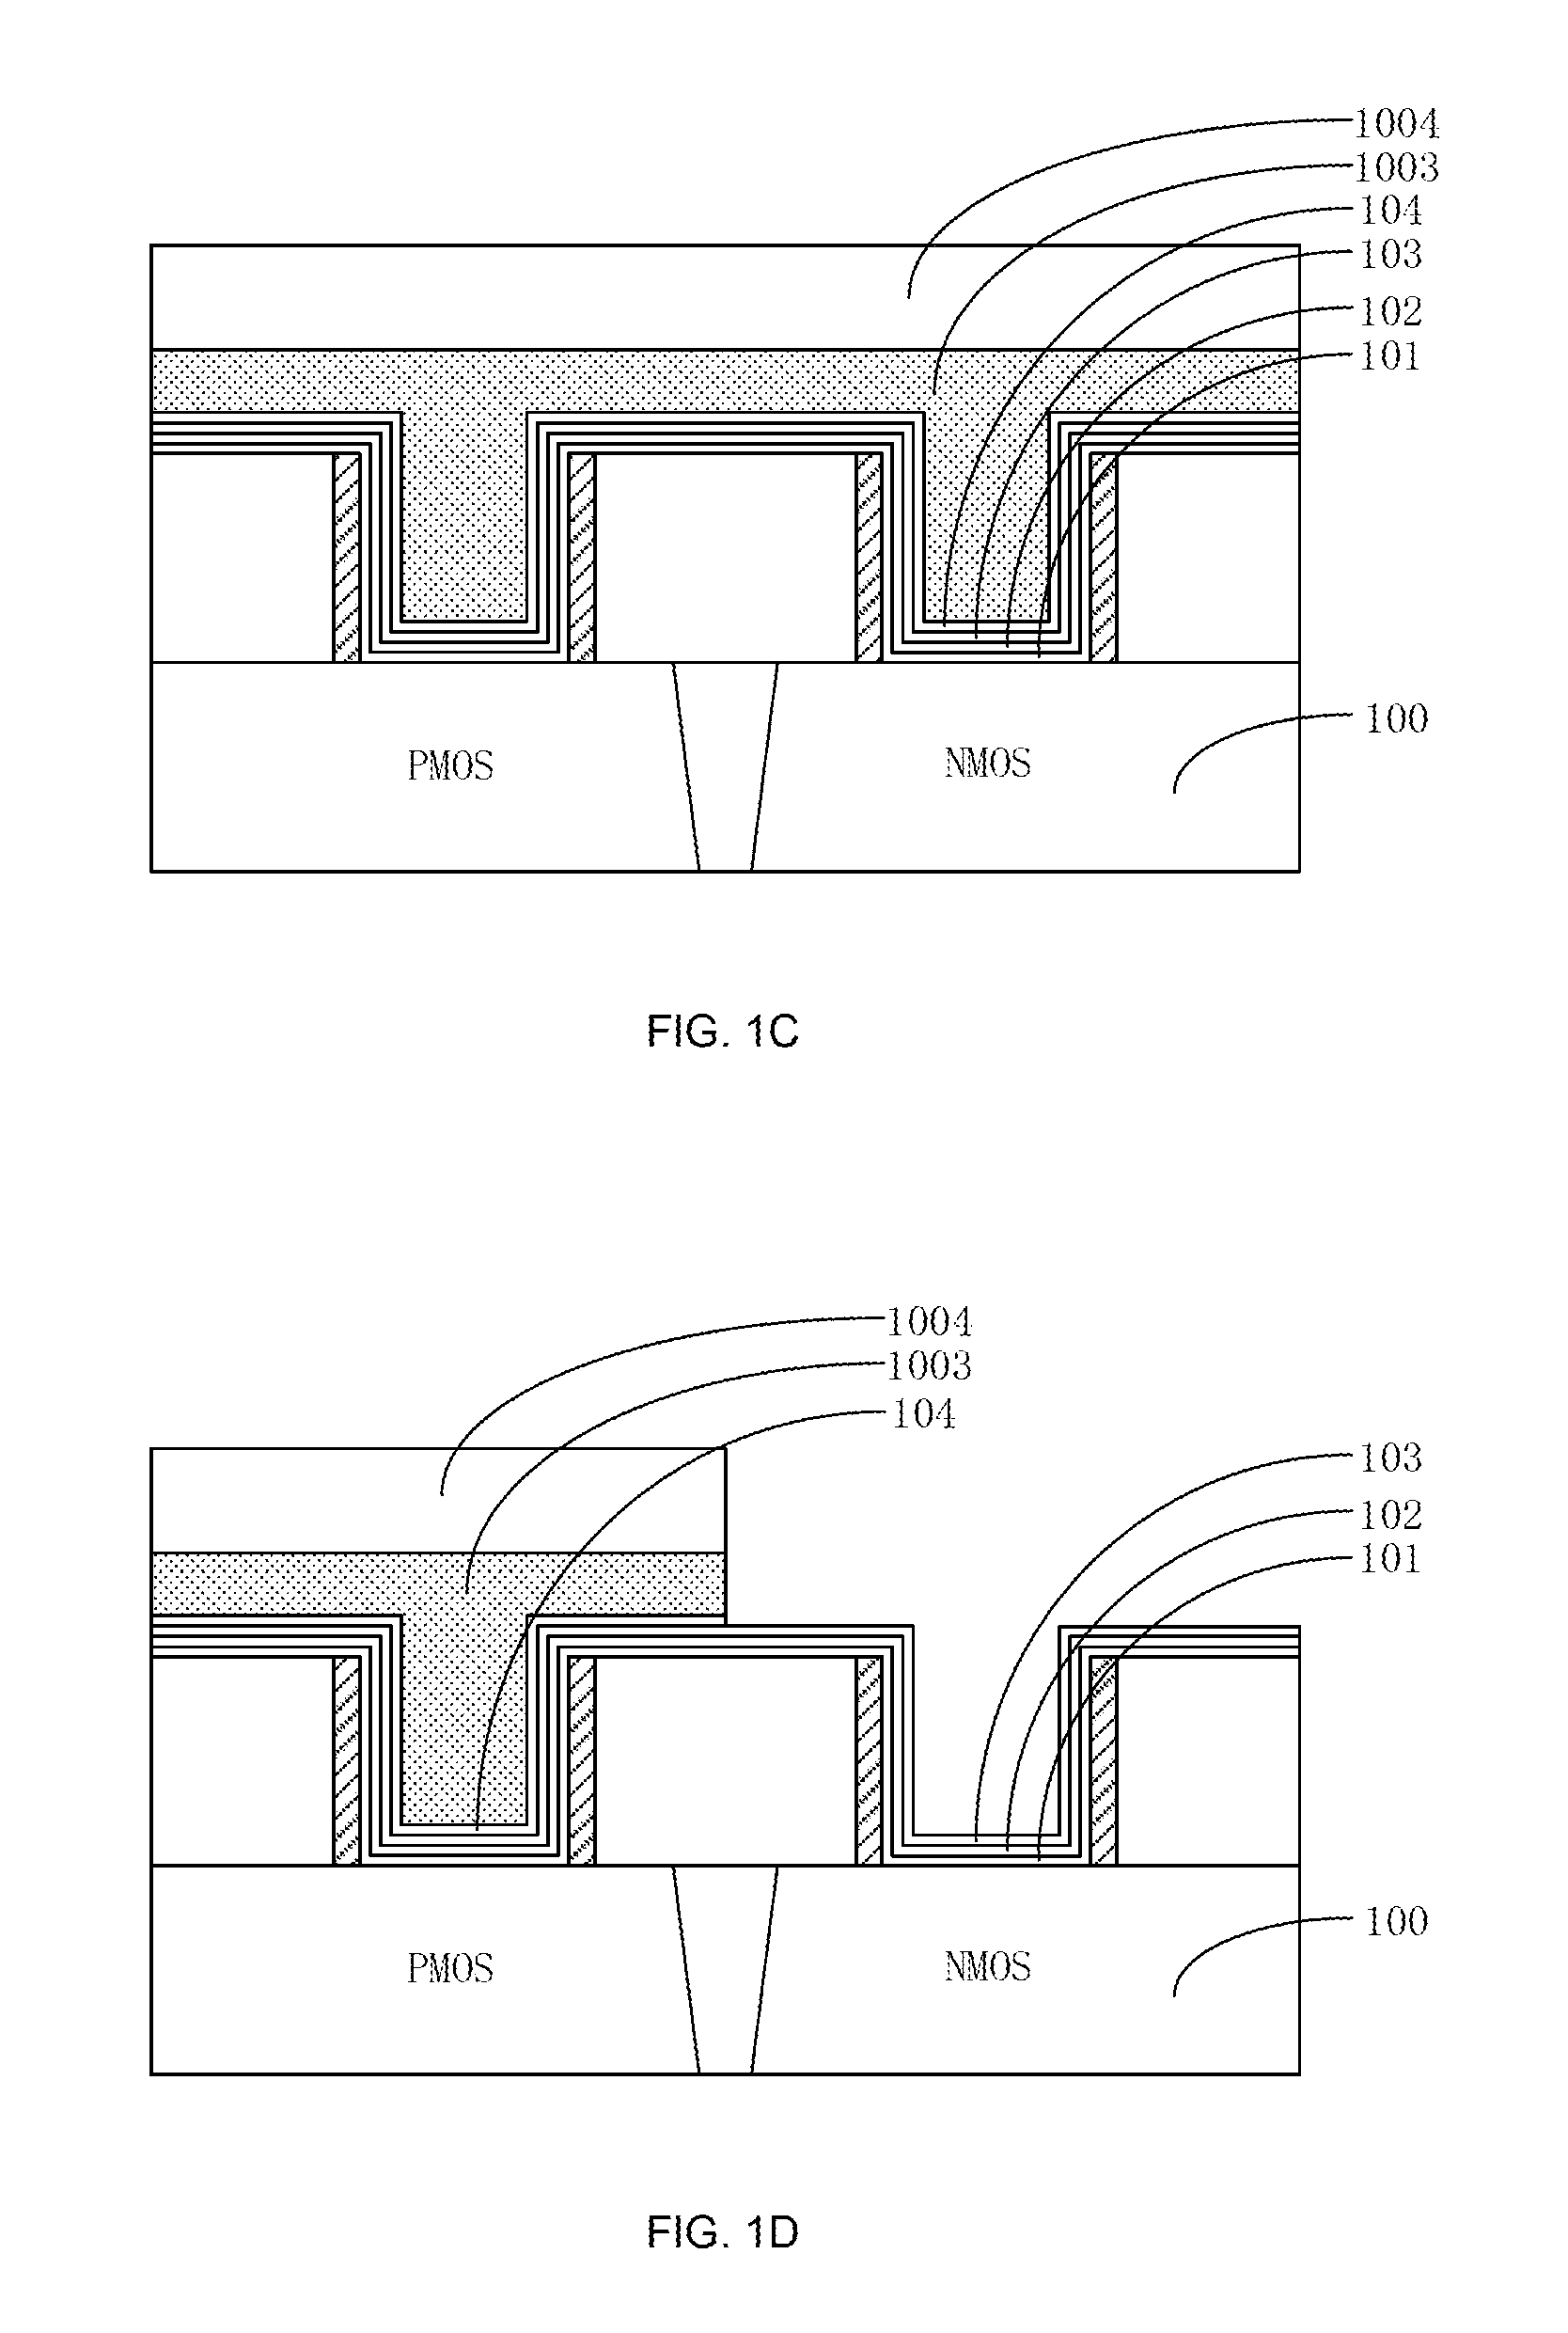 Method for manufacturing CMOS device with high-k dielectric layers and high-k cap layers formed in different steps